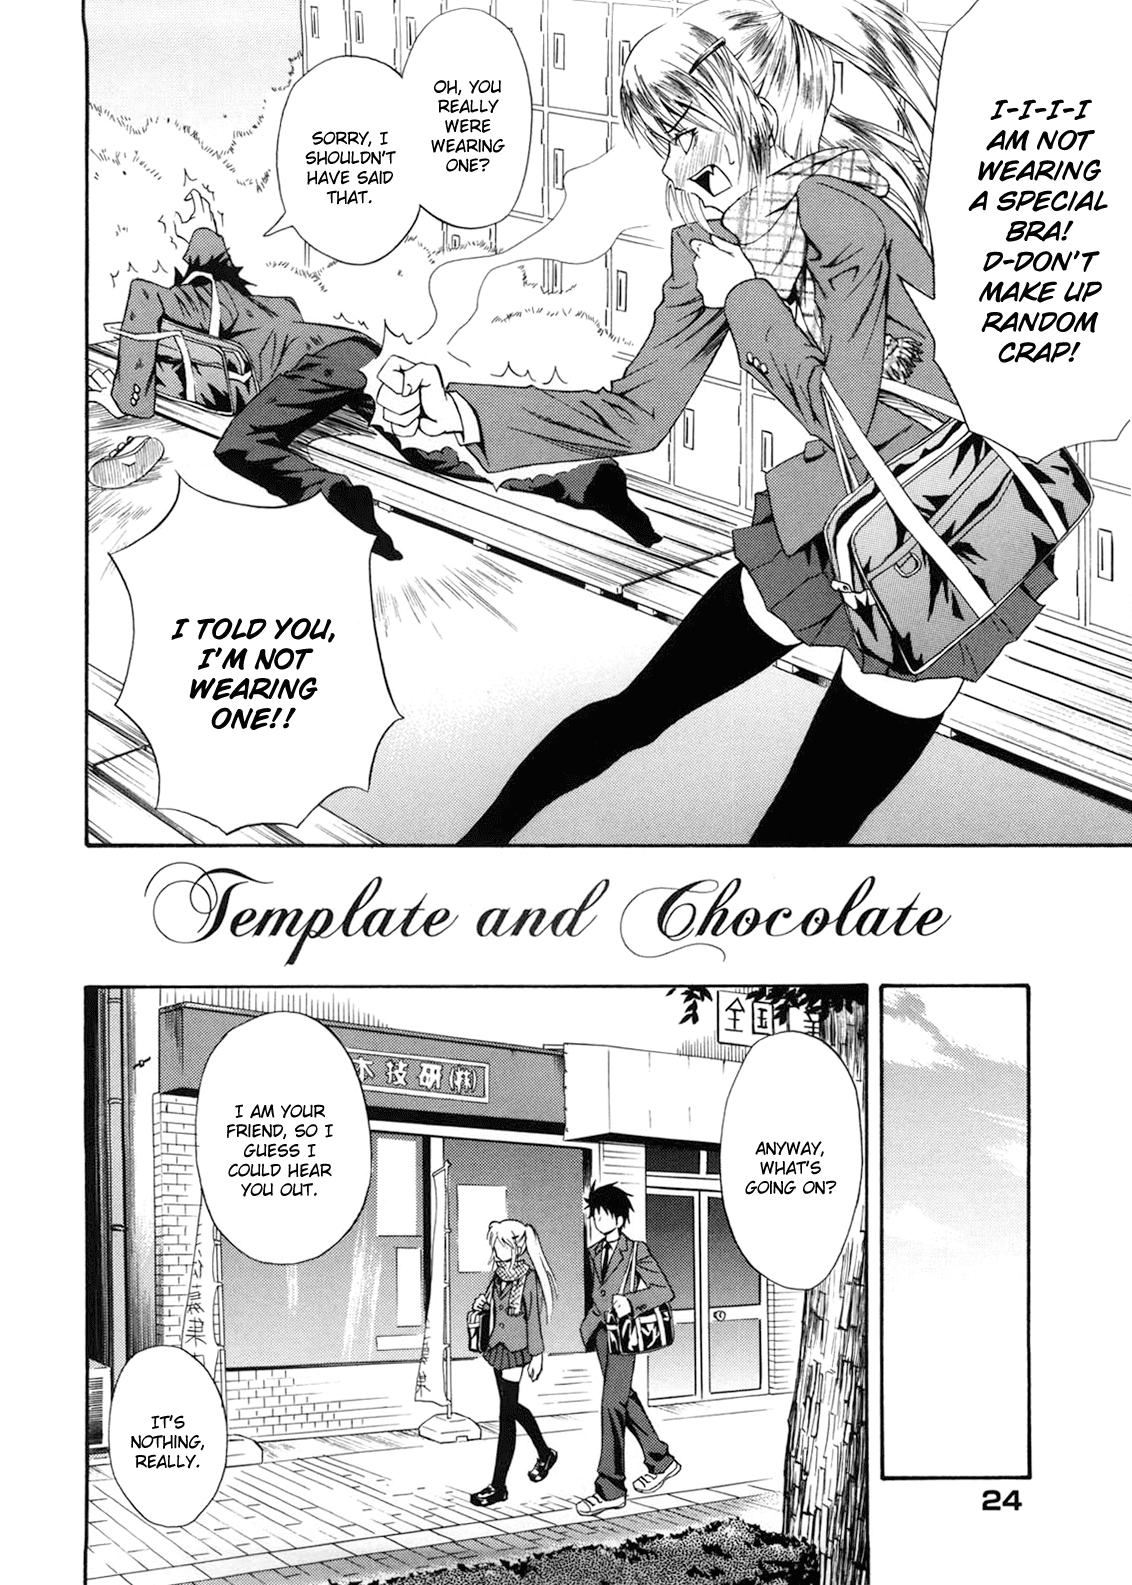 [Aoki Kanji] Template and Chocolate (Only You) [English] [Flatopia] [青木幹治] Template and Chocolate (Only You) [英訳]